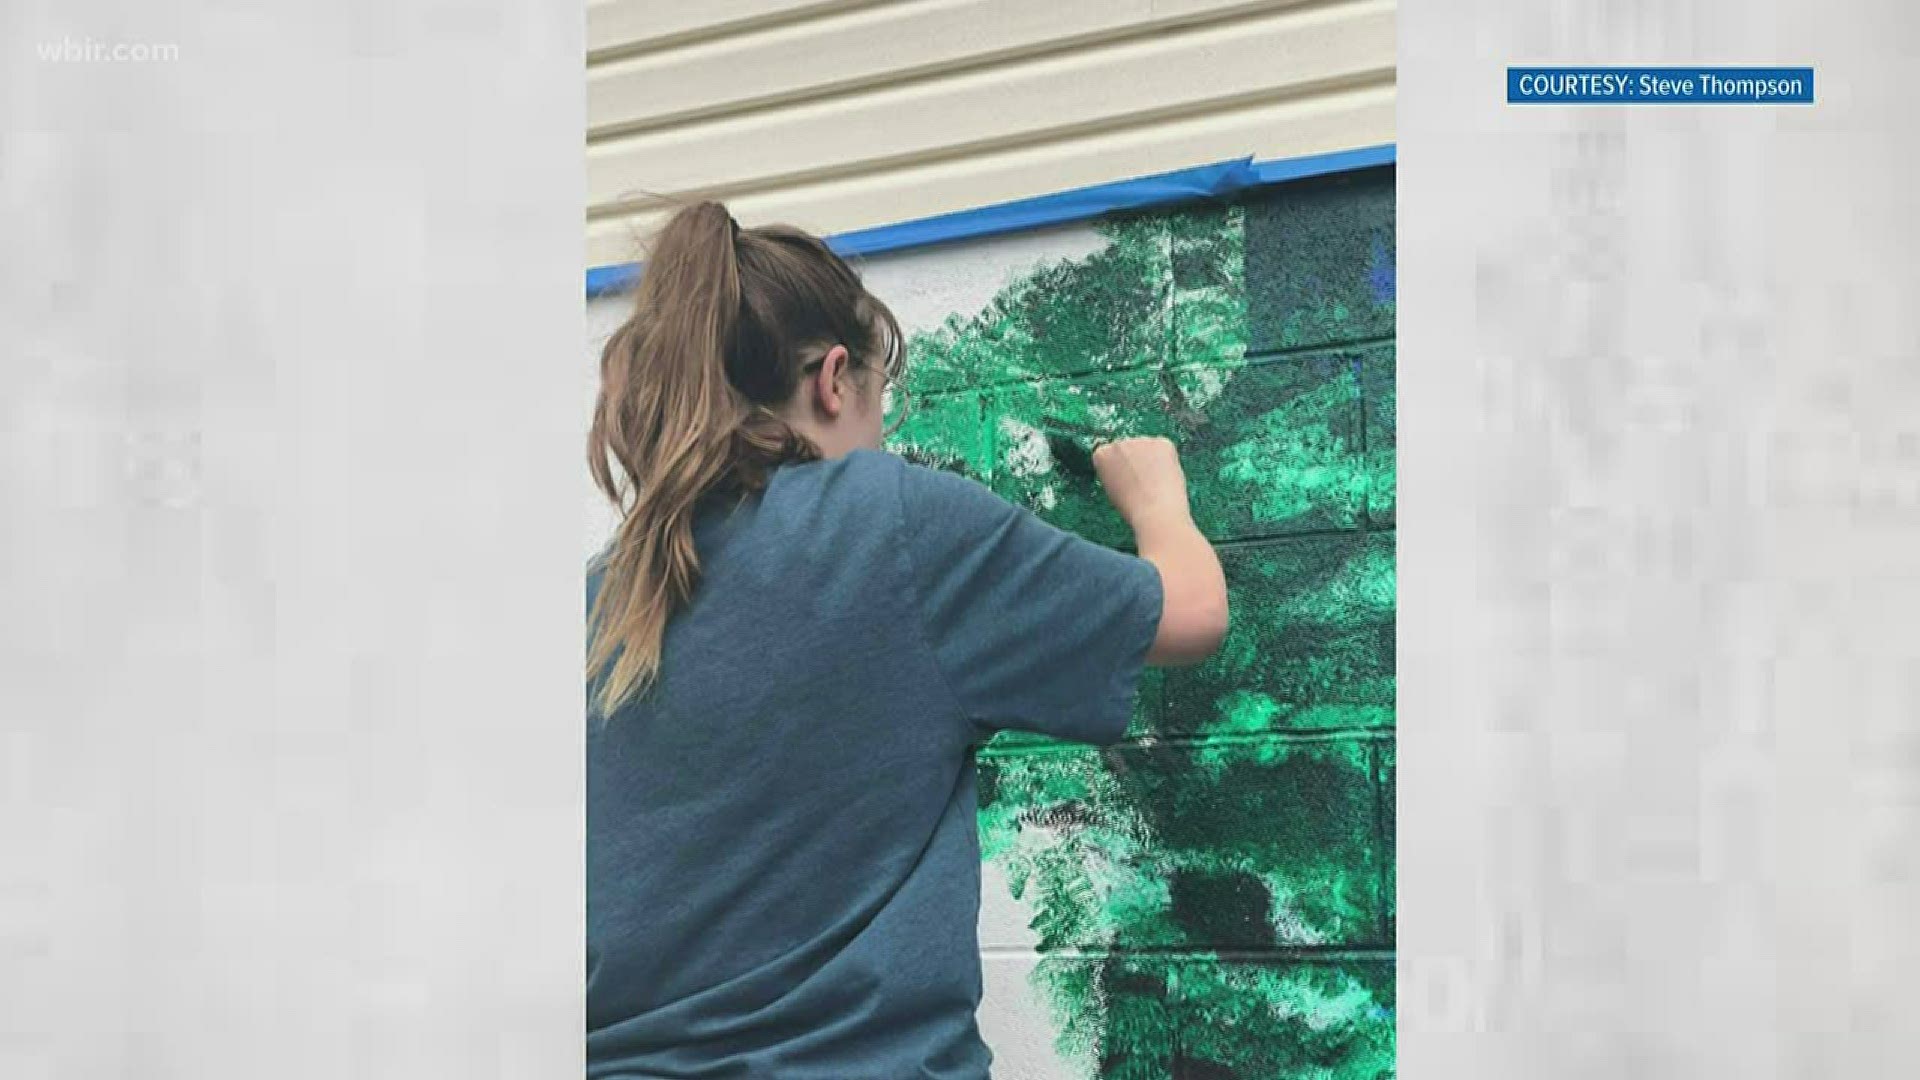 A high school senior who is creating a mural on the outside wall of a building along Maynardville Highway